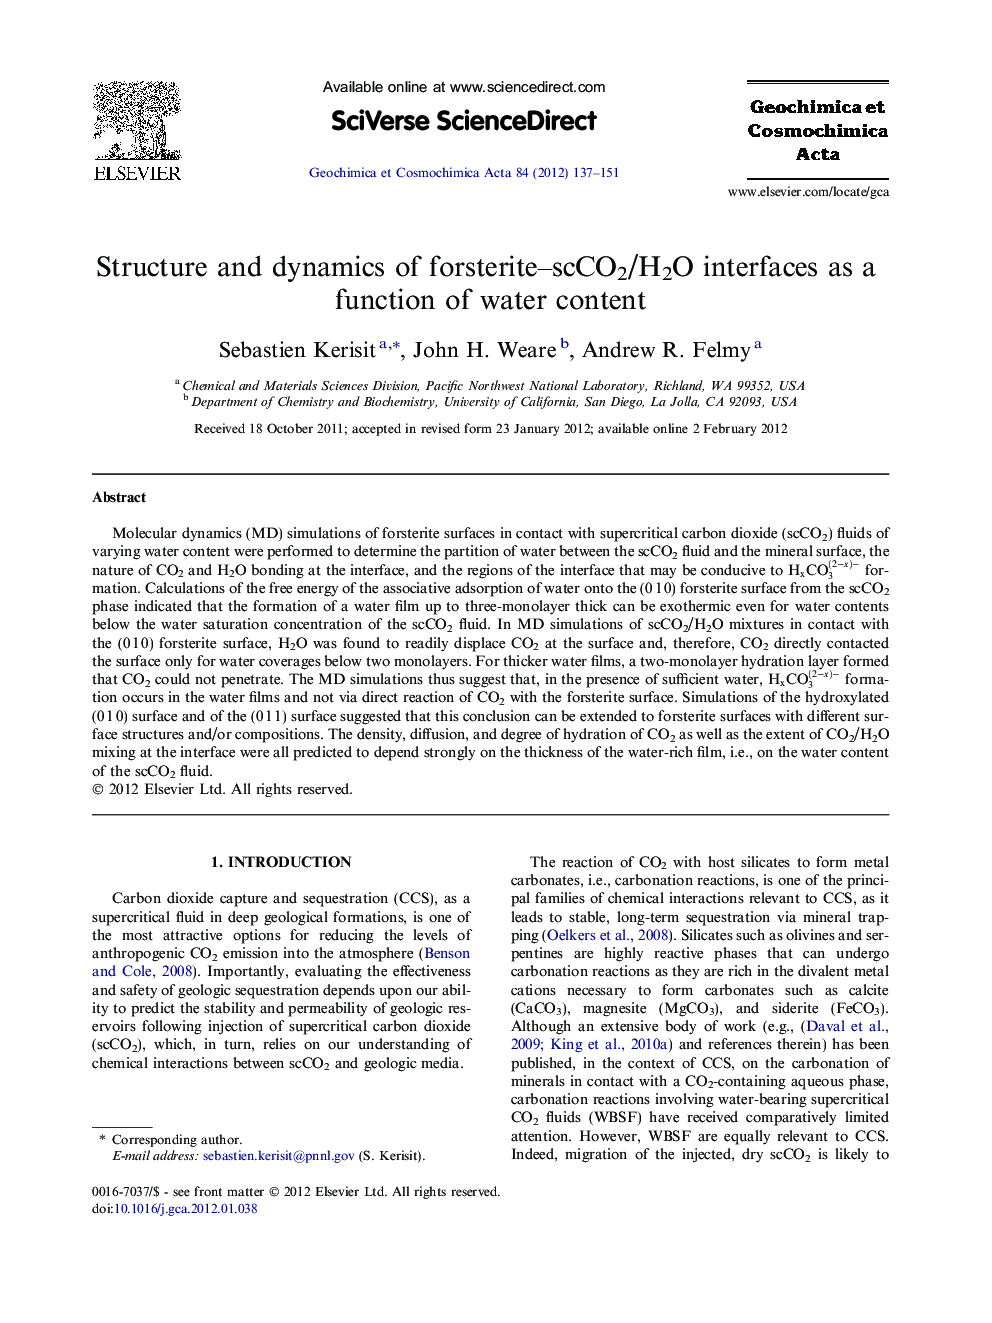 Structure and dynamics of forsterite–scCO2/H2O interfaces as a function of water content